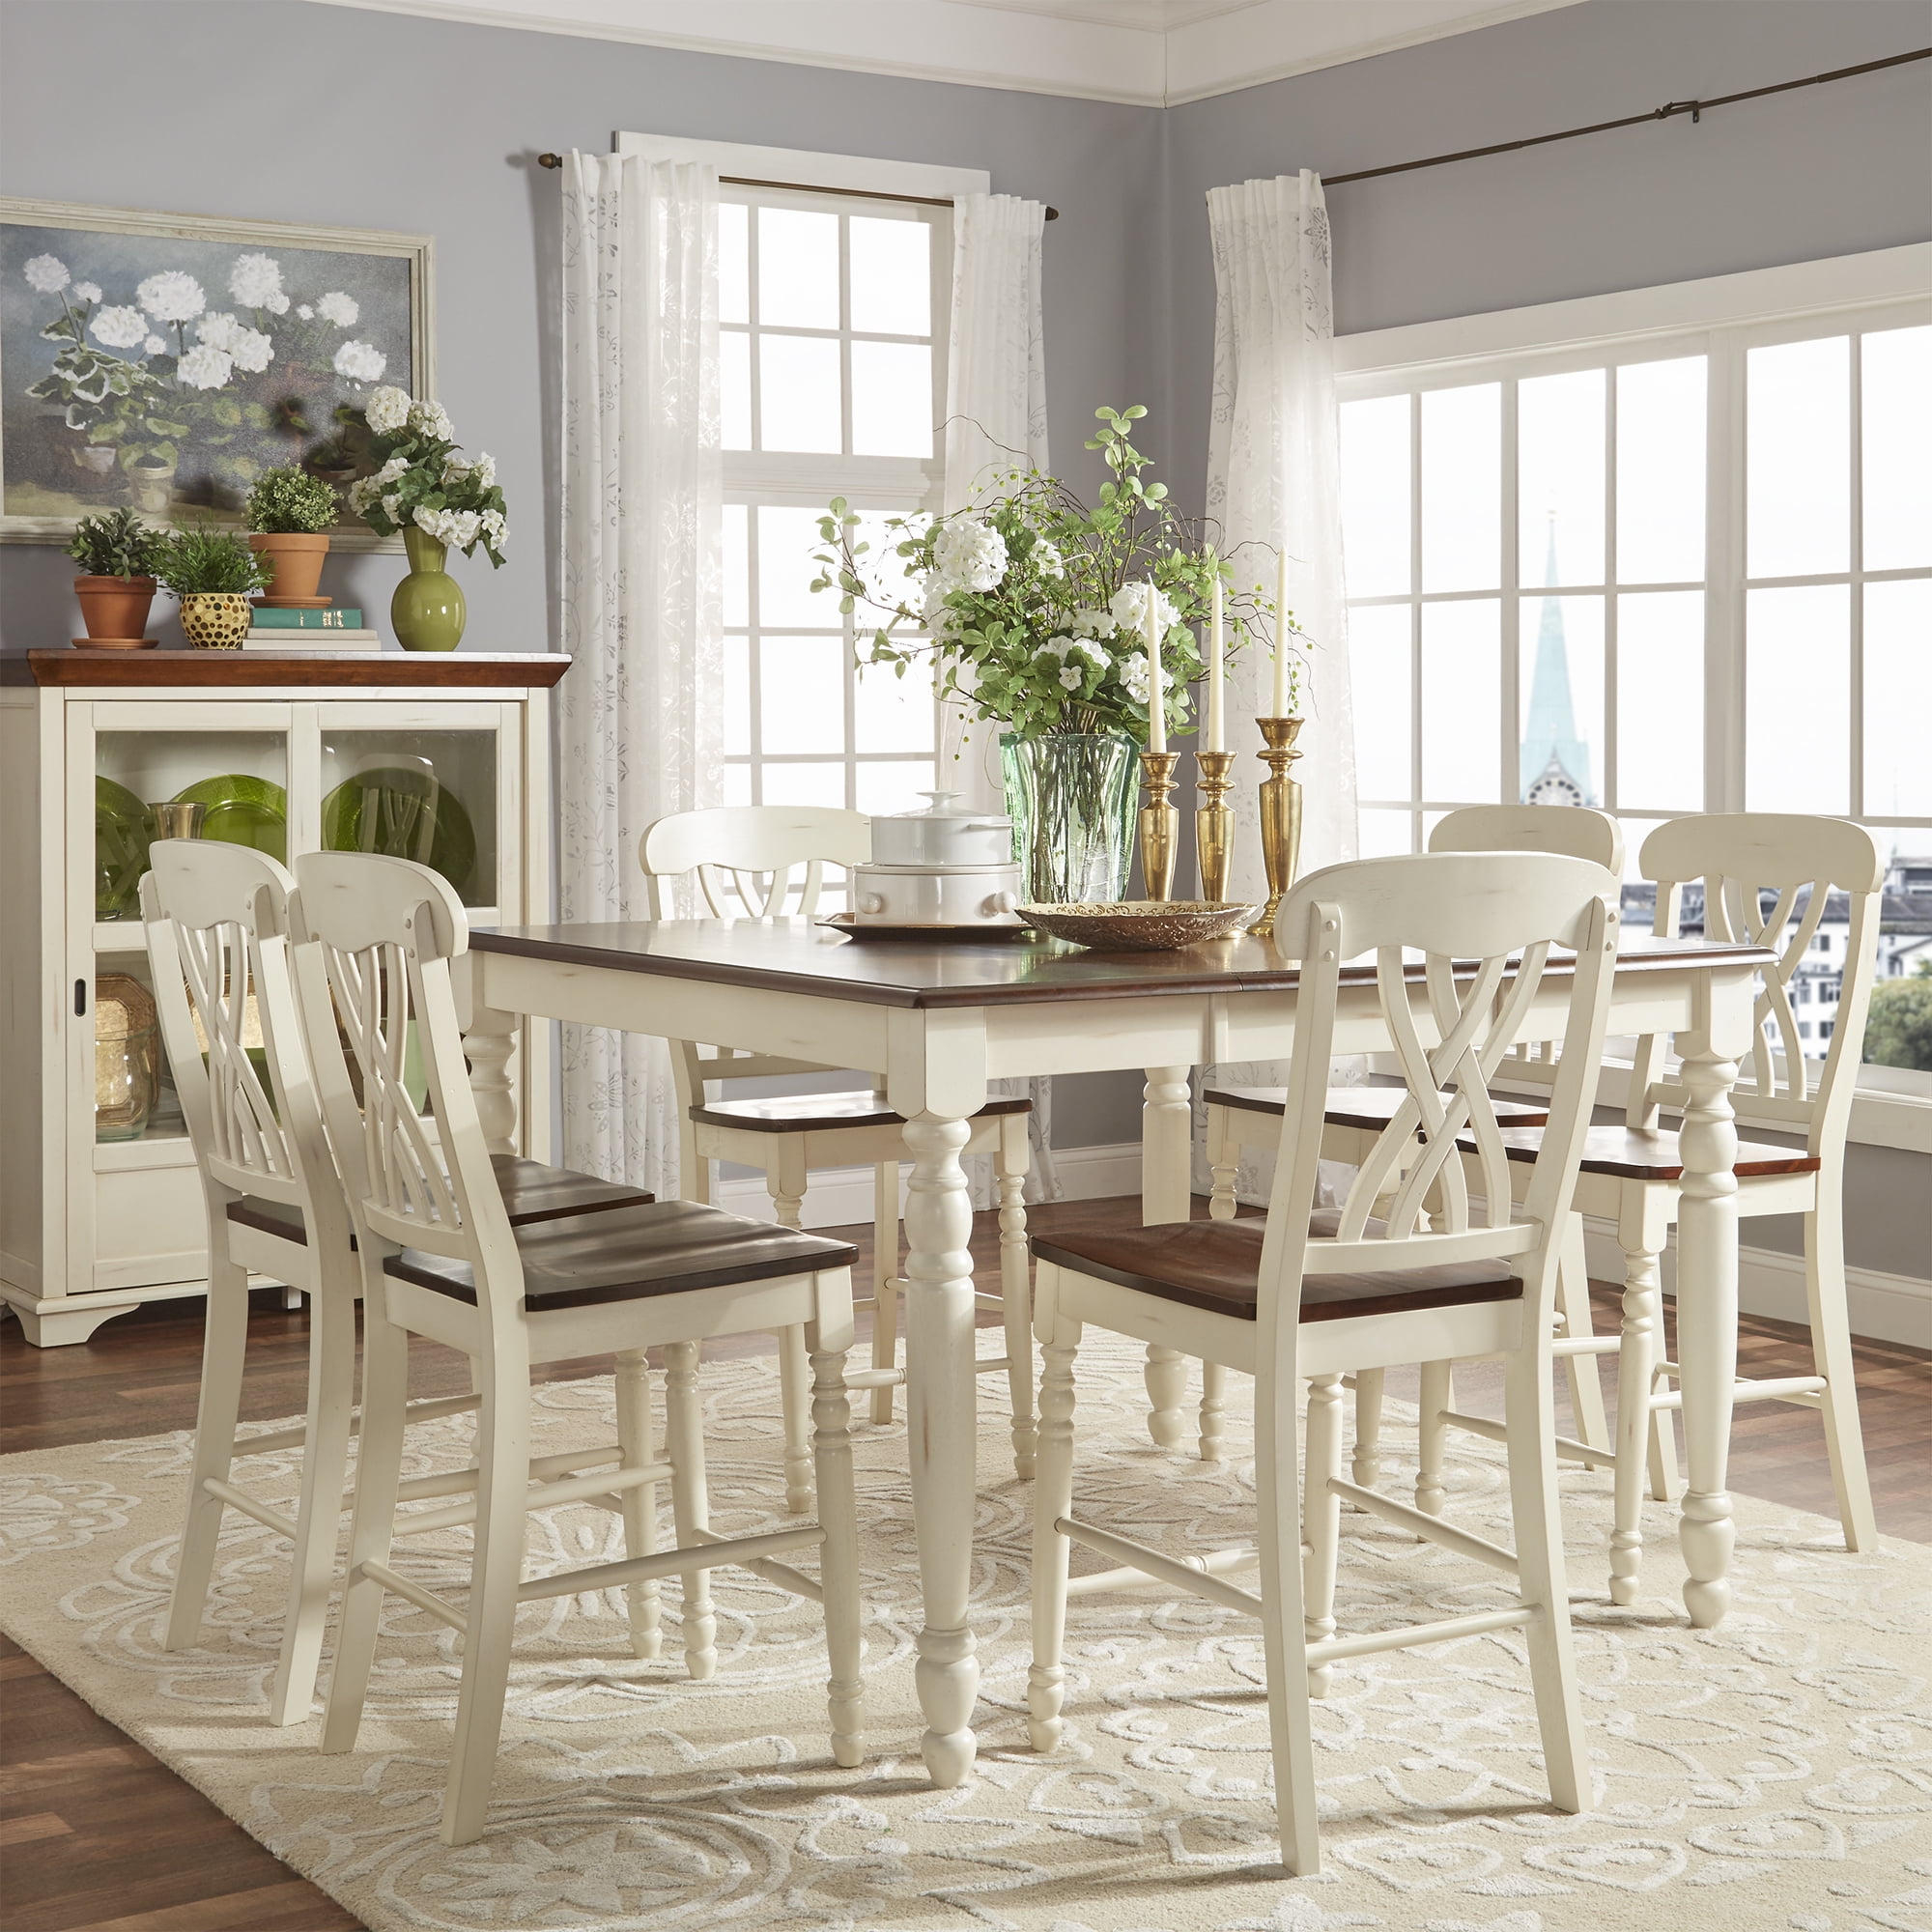 7 Piece Counter Height Dining Set, 50 8217 S Dining Room Sets